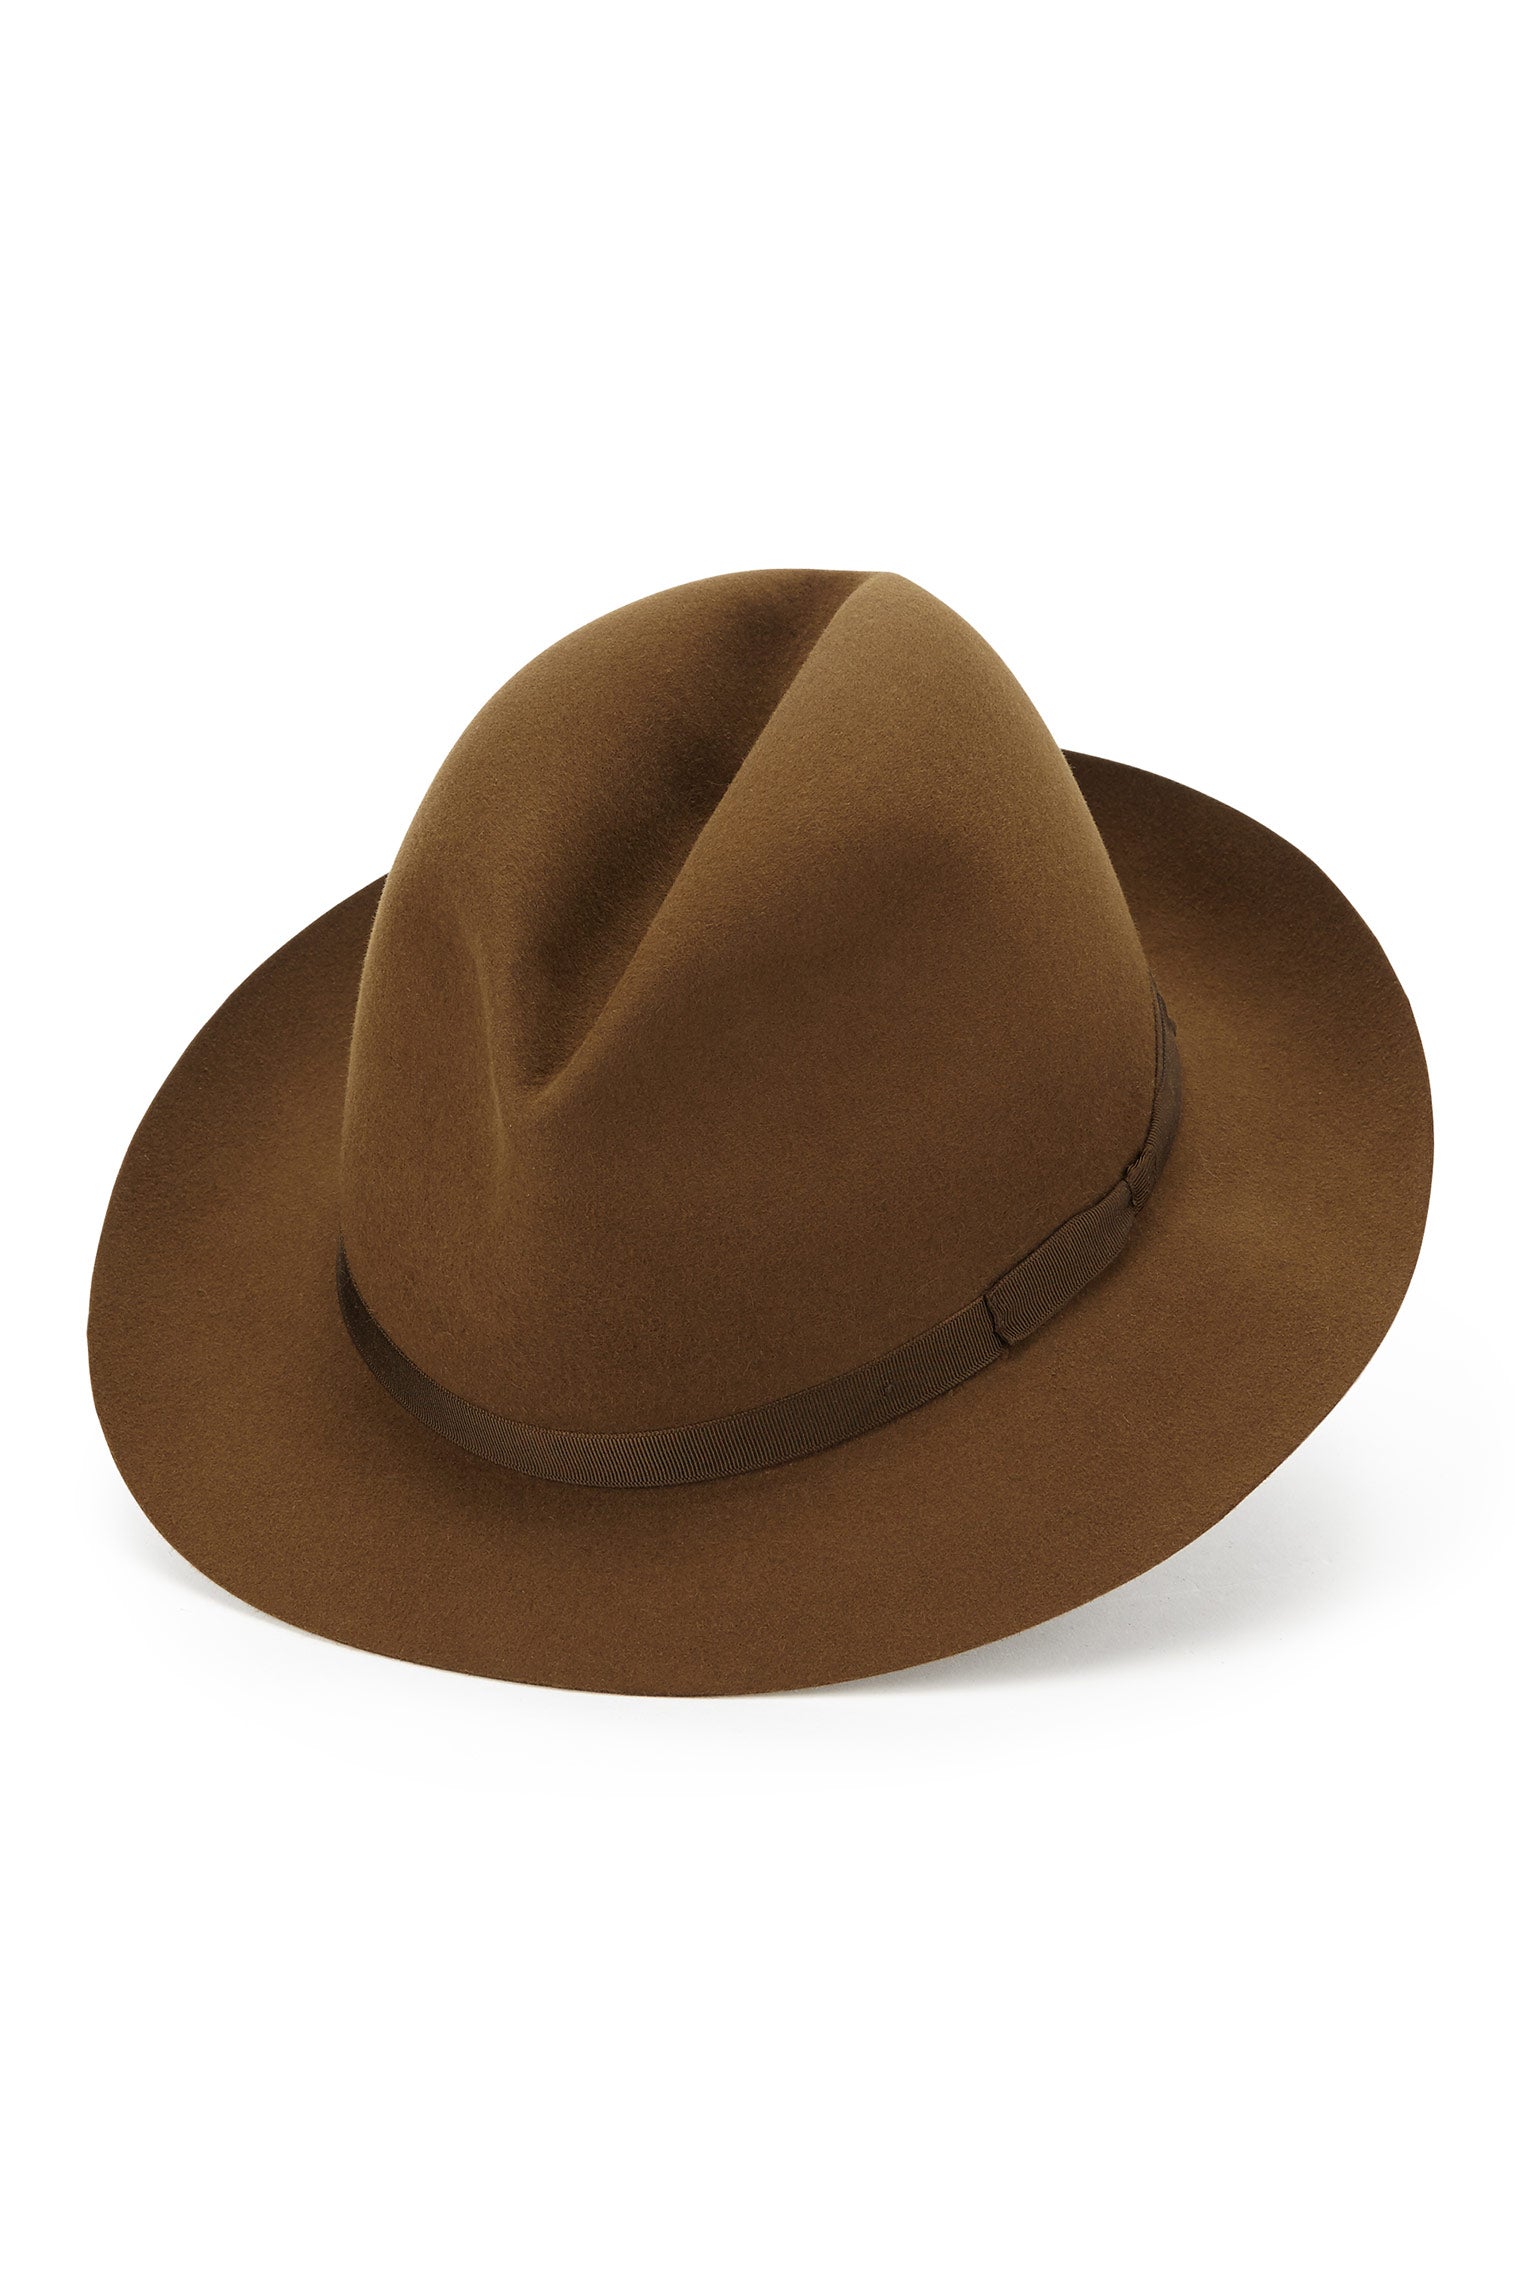 Voyager Rollable Trilby - Lock & Co. Christmas Gift Edit - Lock & Co. Hatters London UK